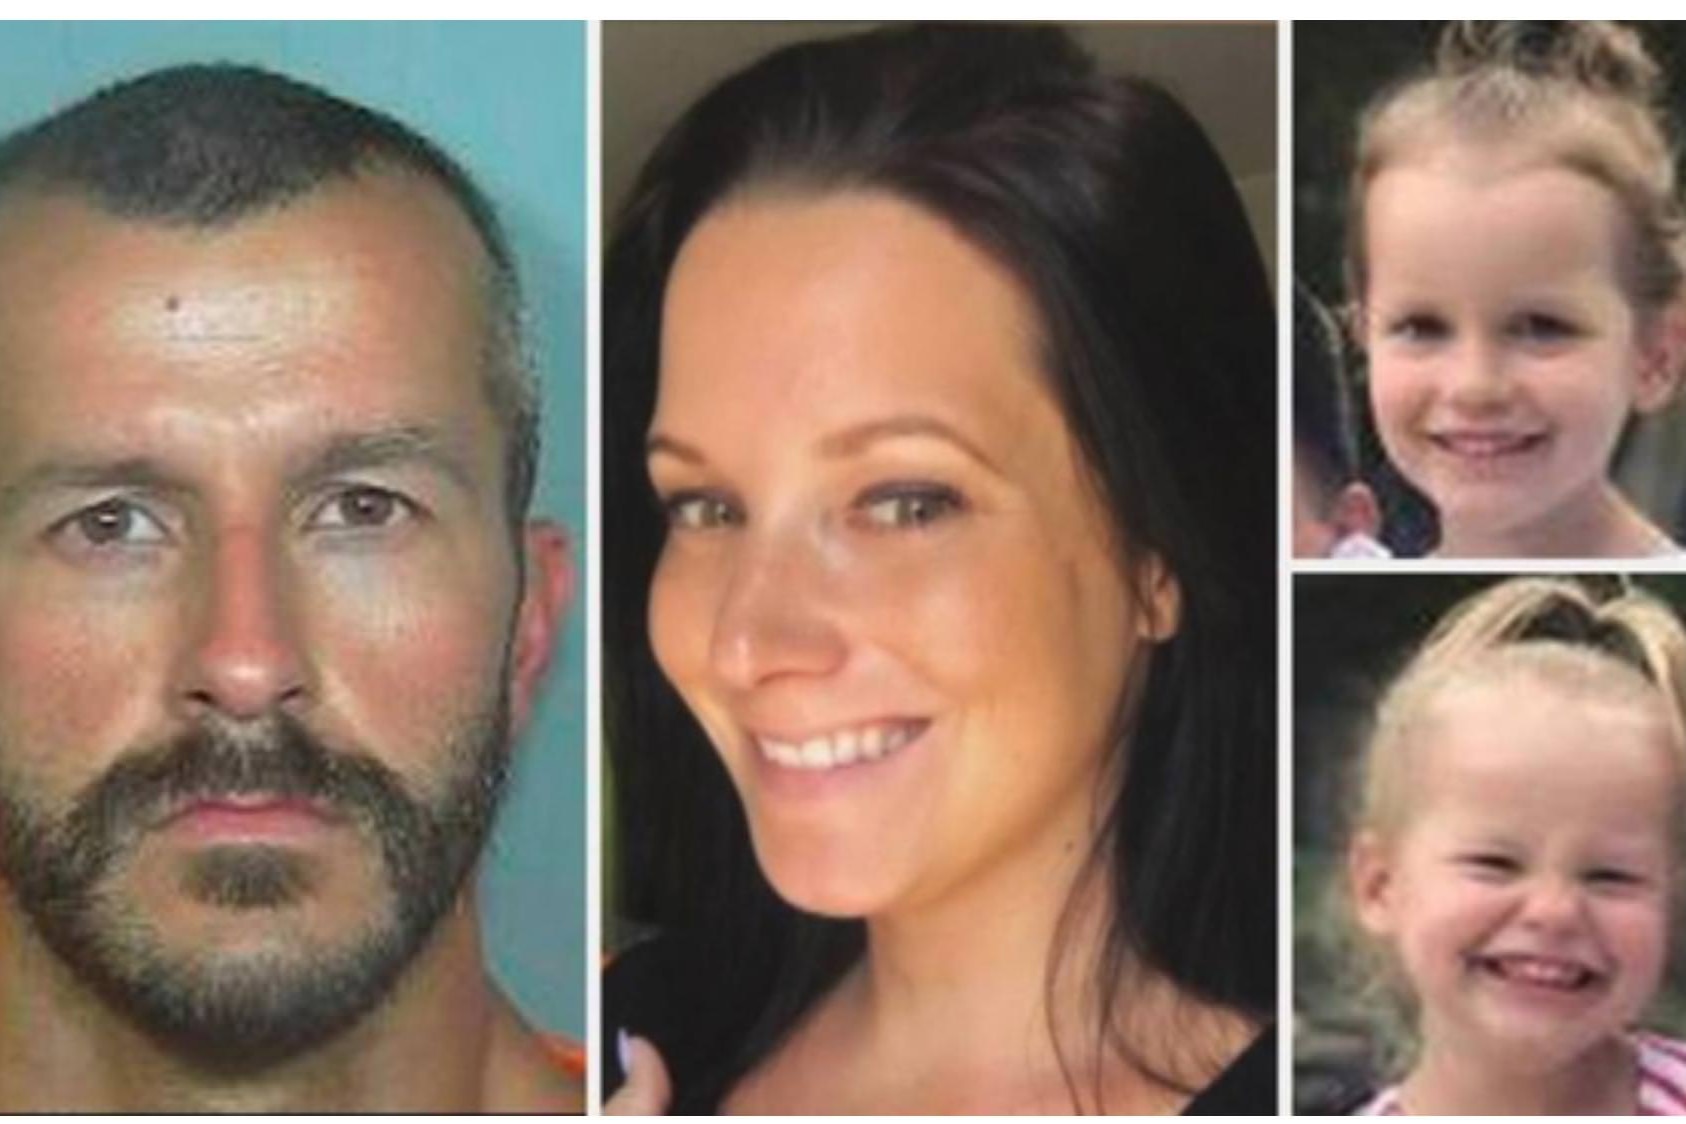 Chris Watts Arraigned As Shanann Watts’ Dad Frank Rzucek Weeps In Court | Crime Time